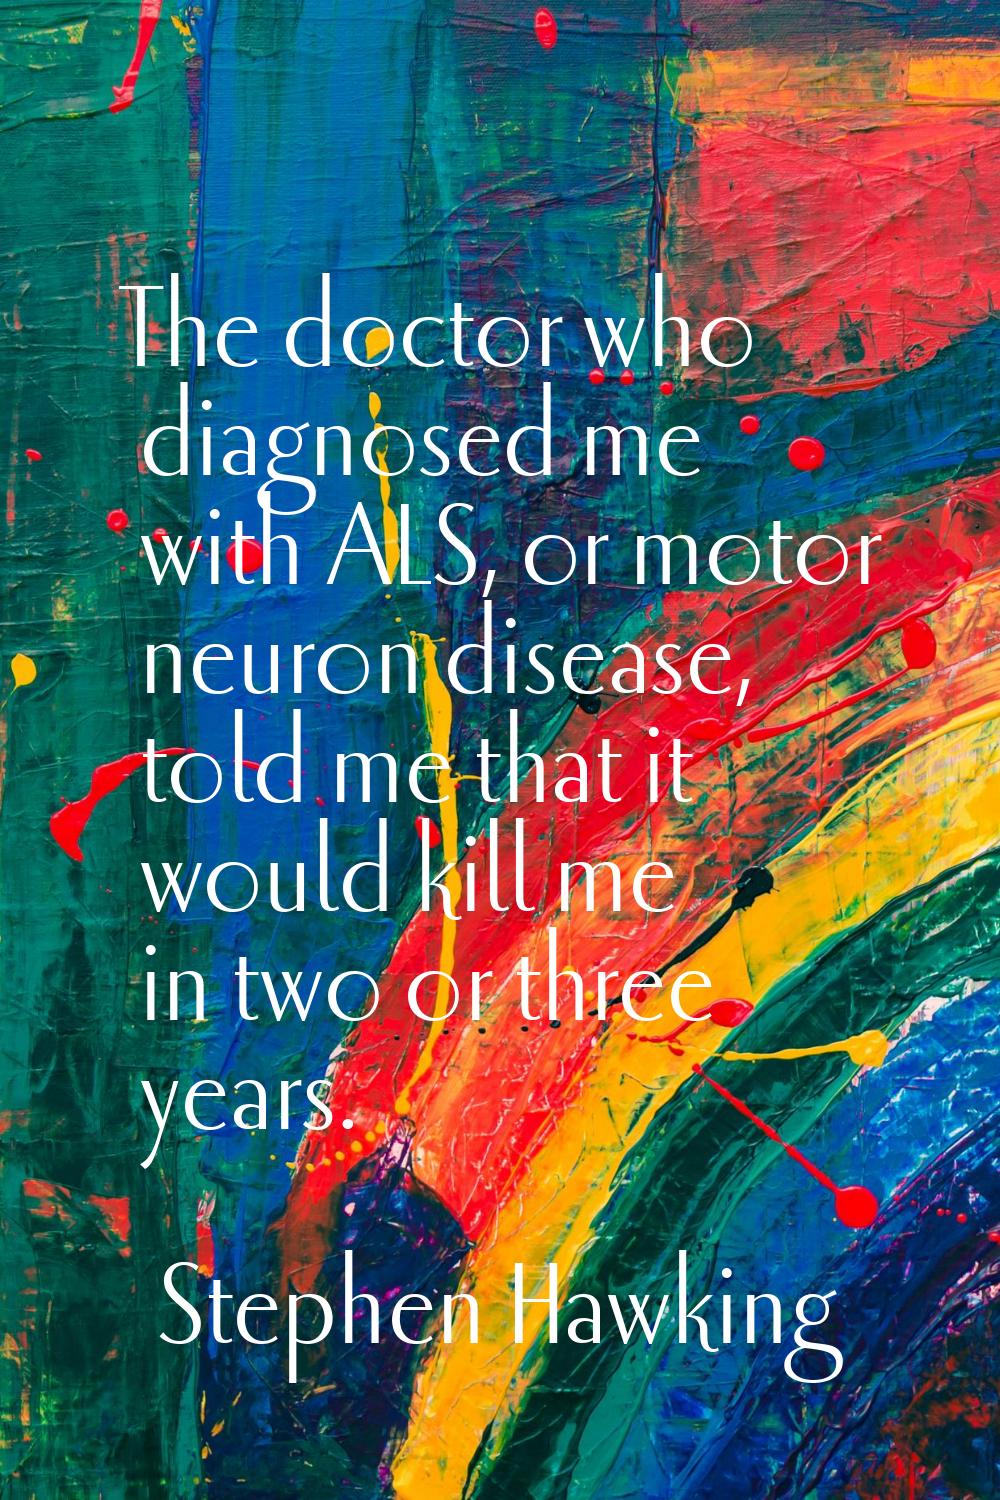 The doctor who diagnosed me with ALS, or motor neuron disease, told me that it would kill me in two